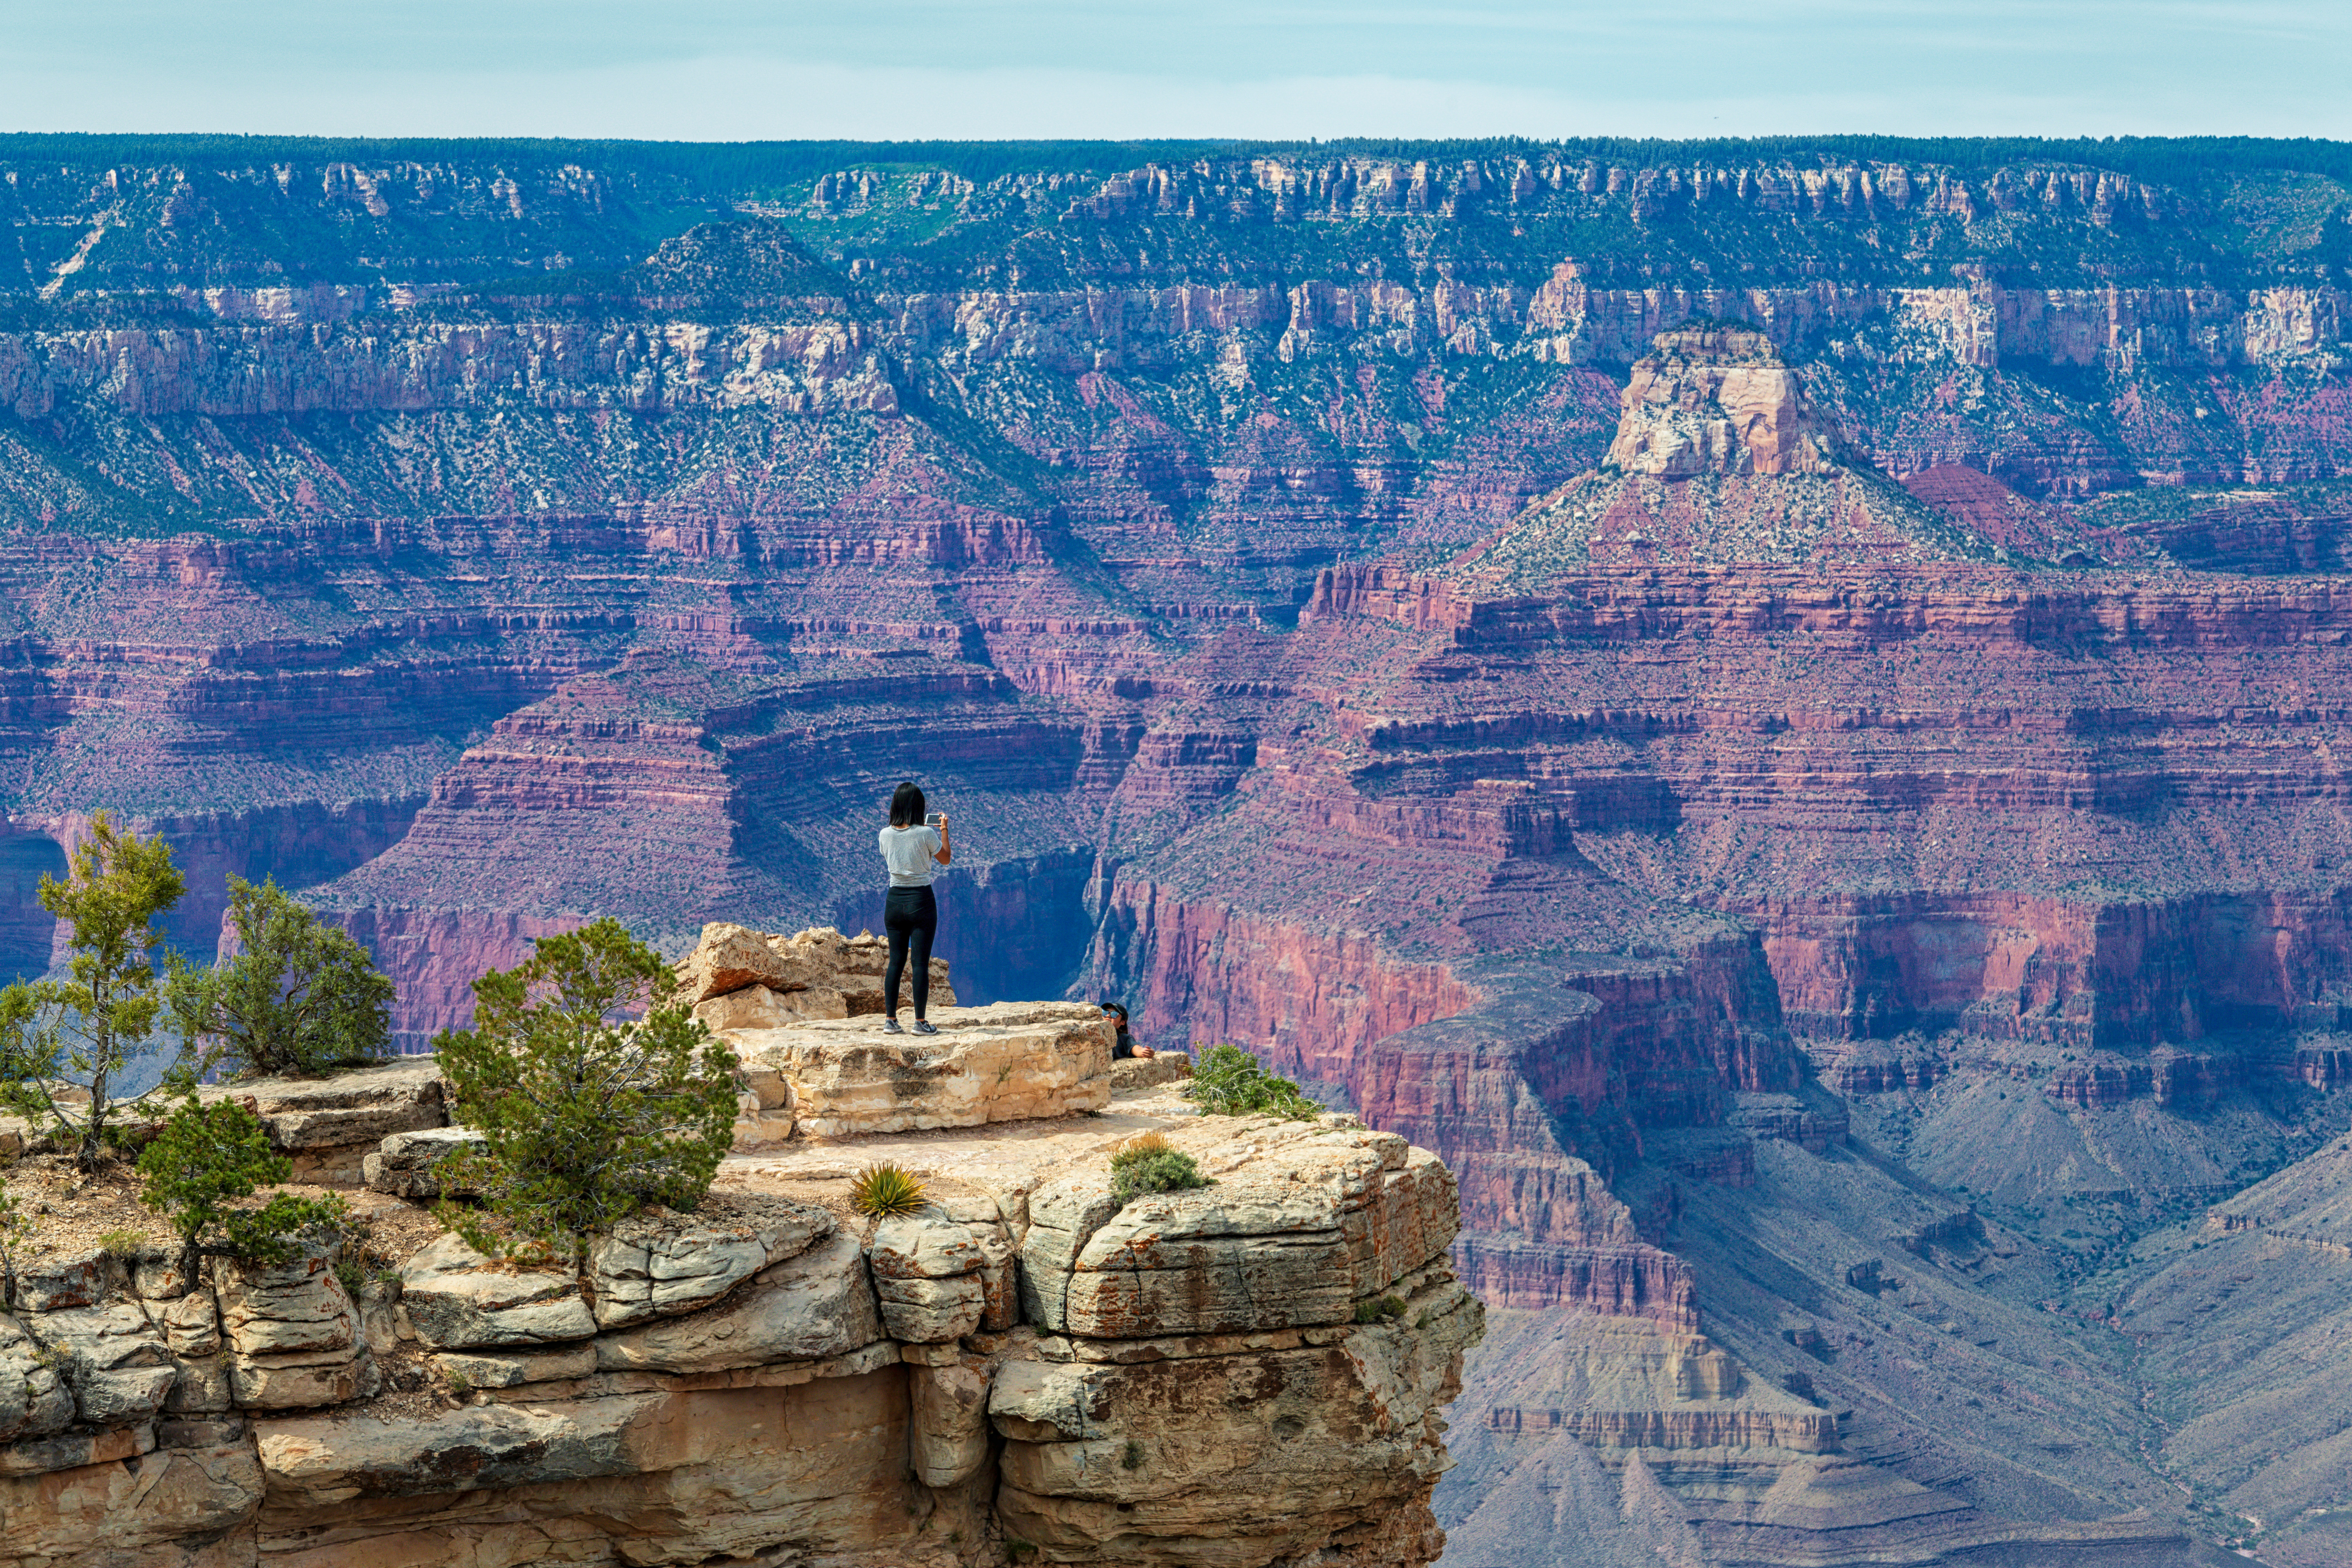 Person standing on a cliff and overlooking canyons